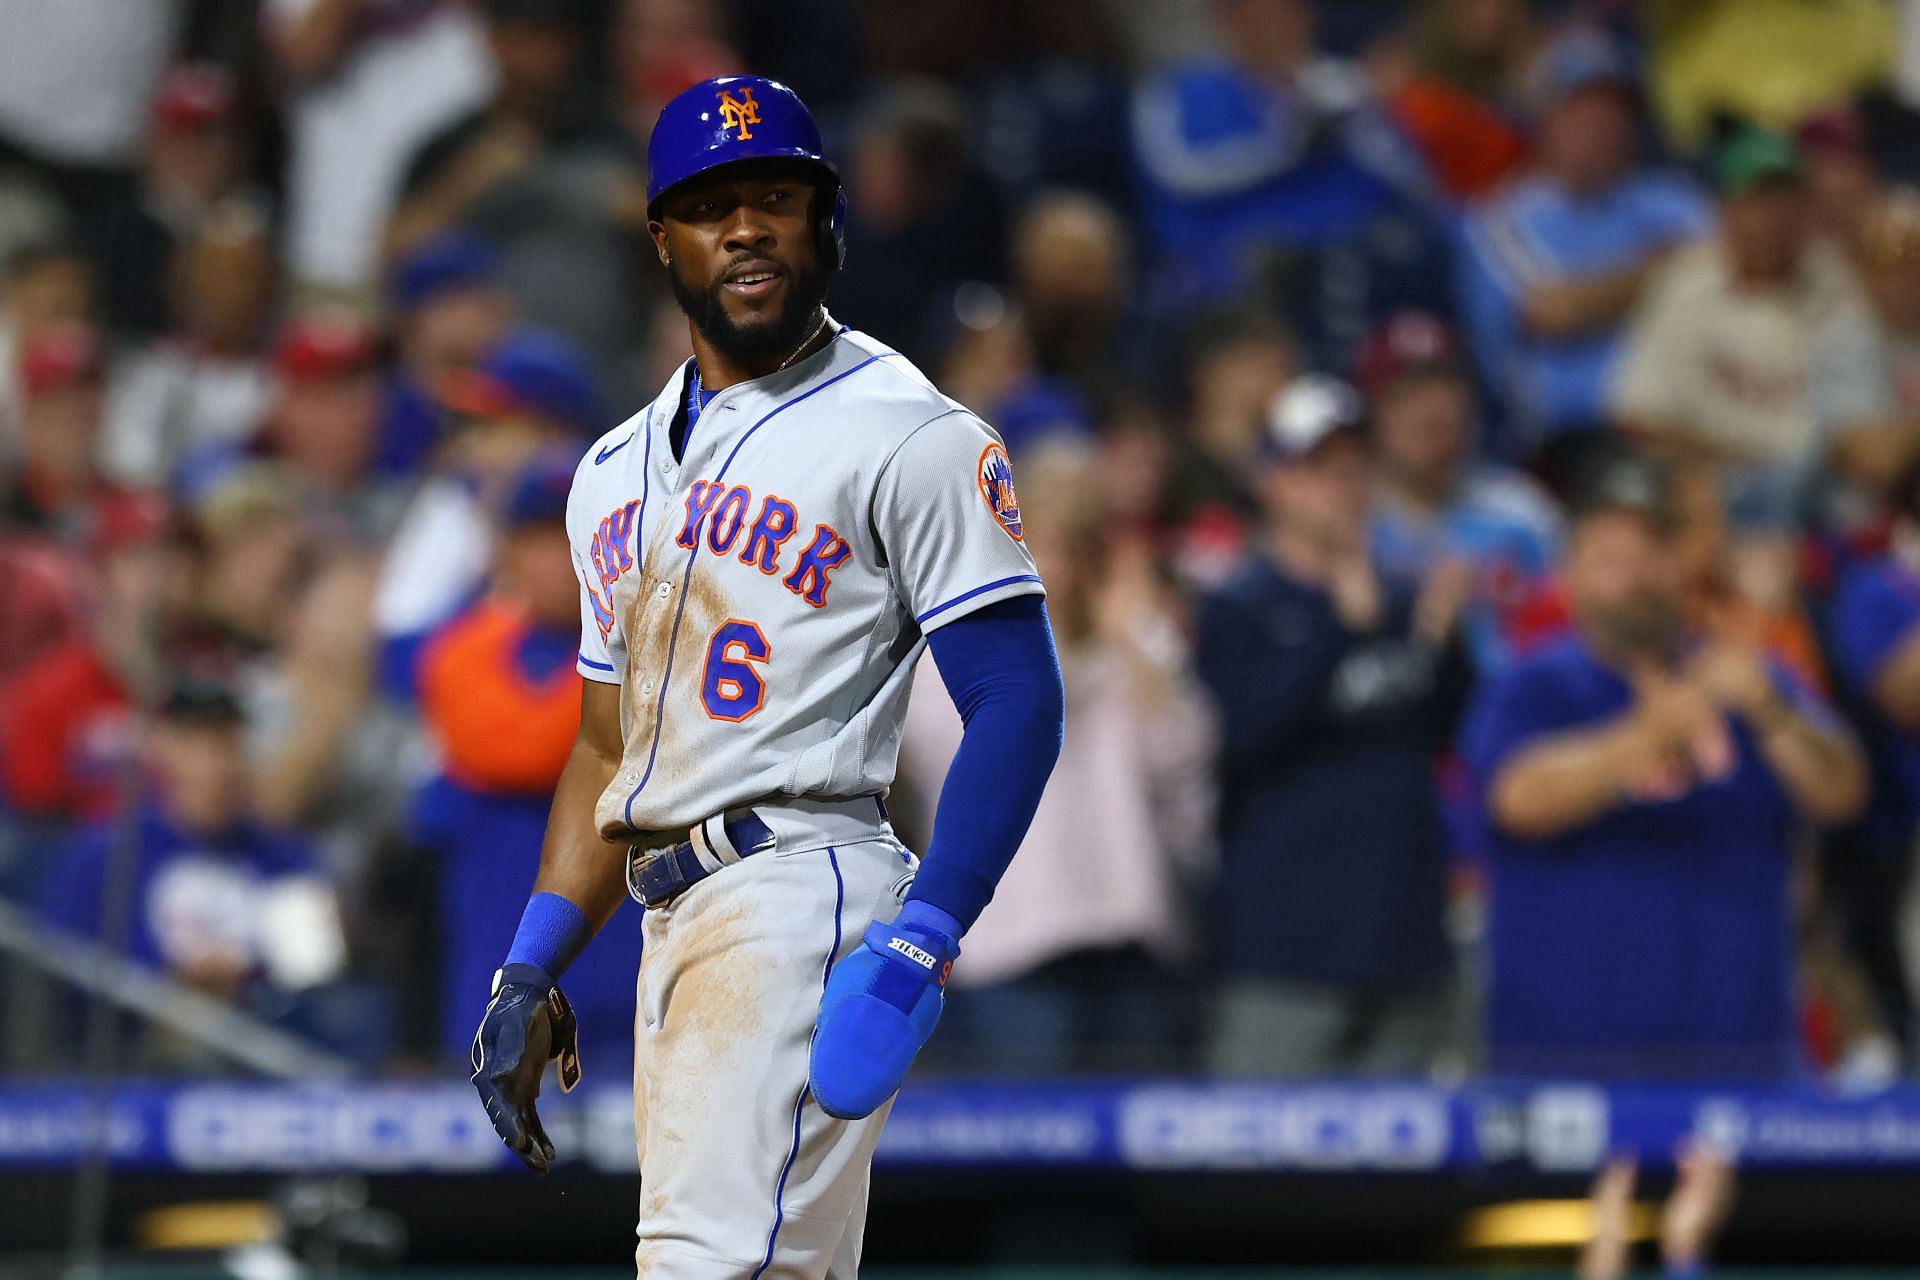 When Robinson Cano's agent clarified that the former Mets star was not ...